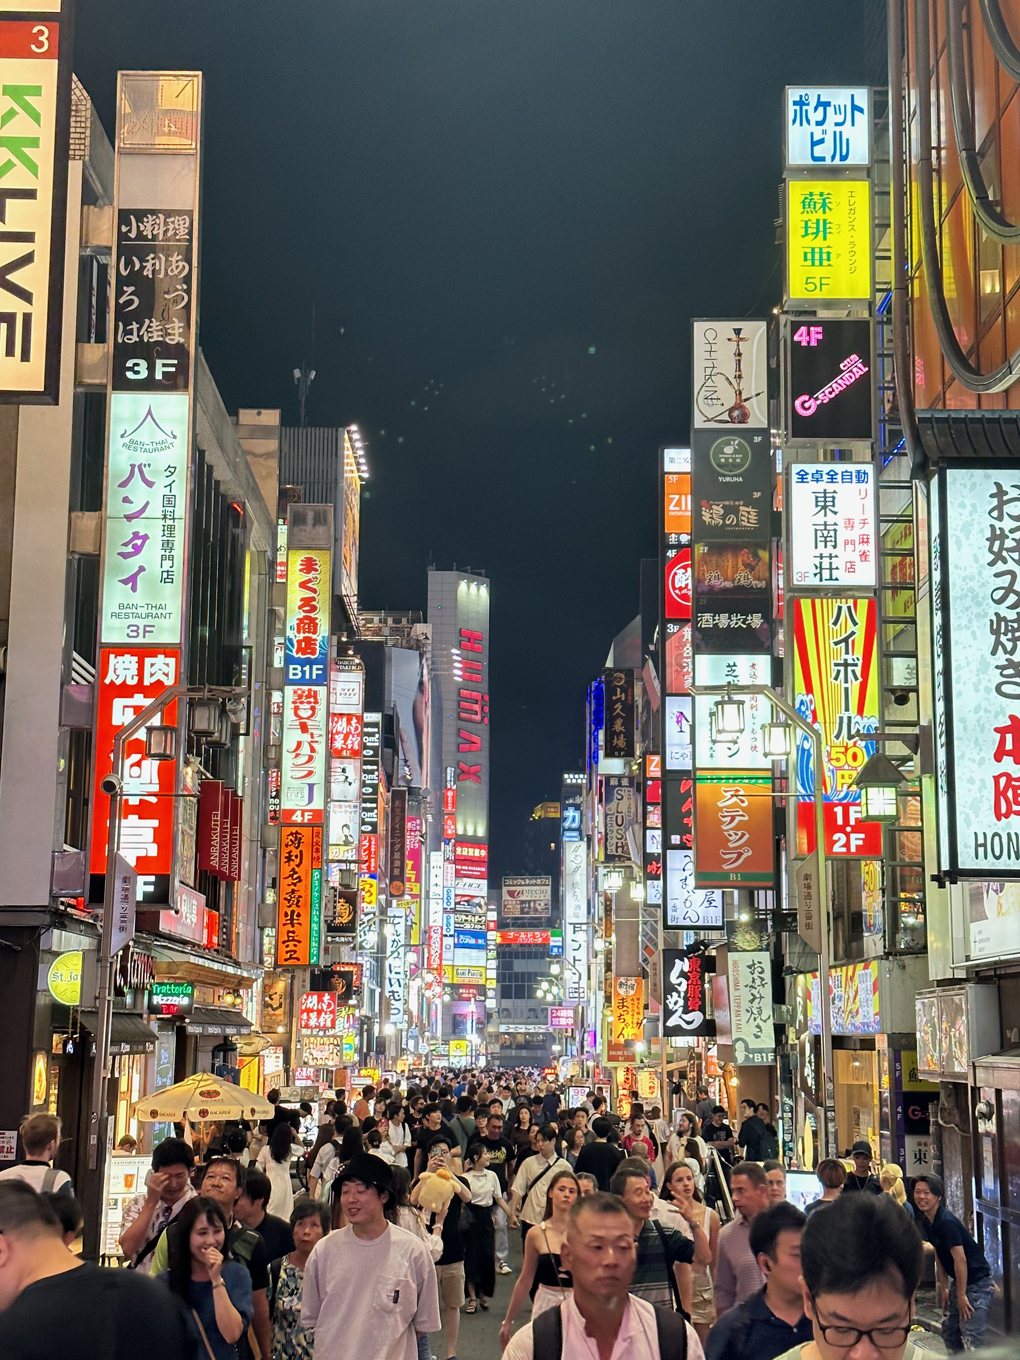 Tokyo street with many people and buildings with neon signs.